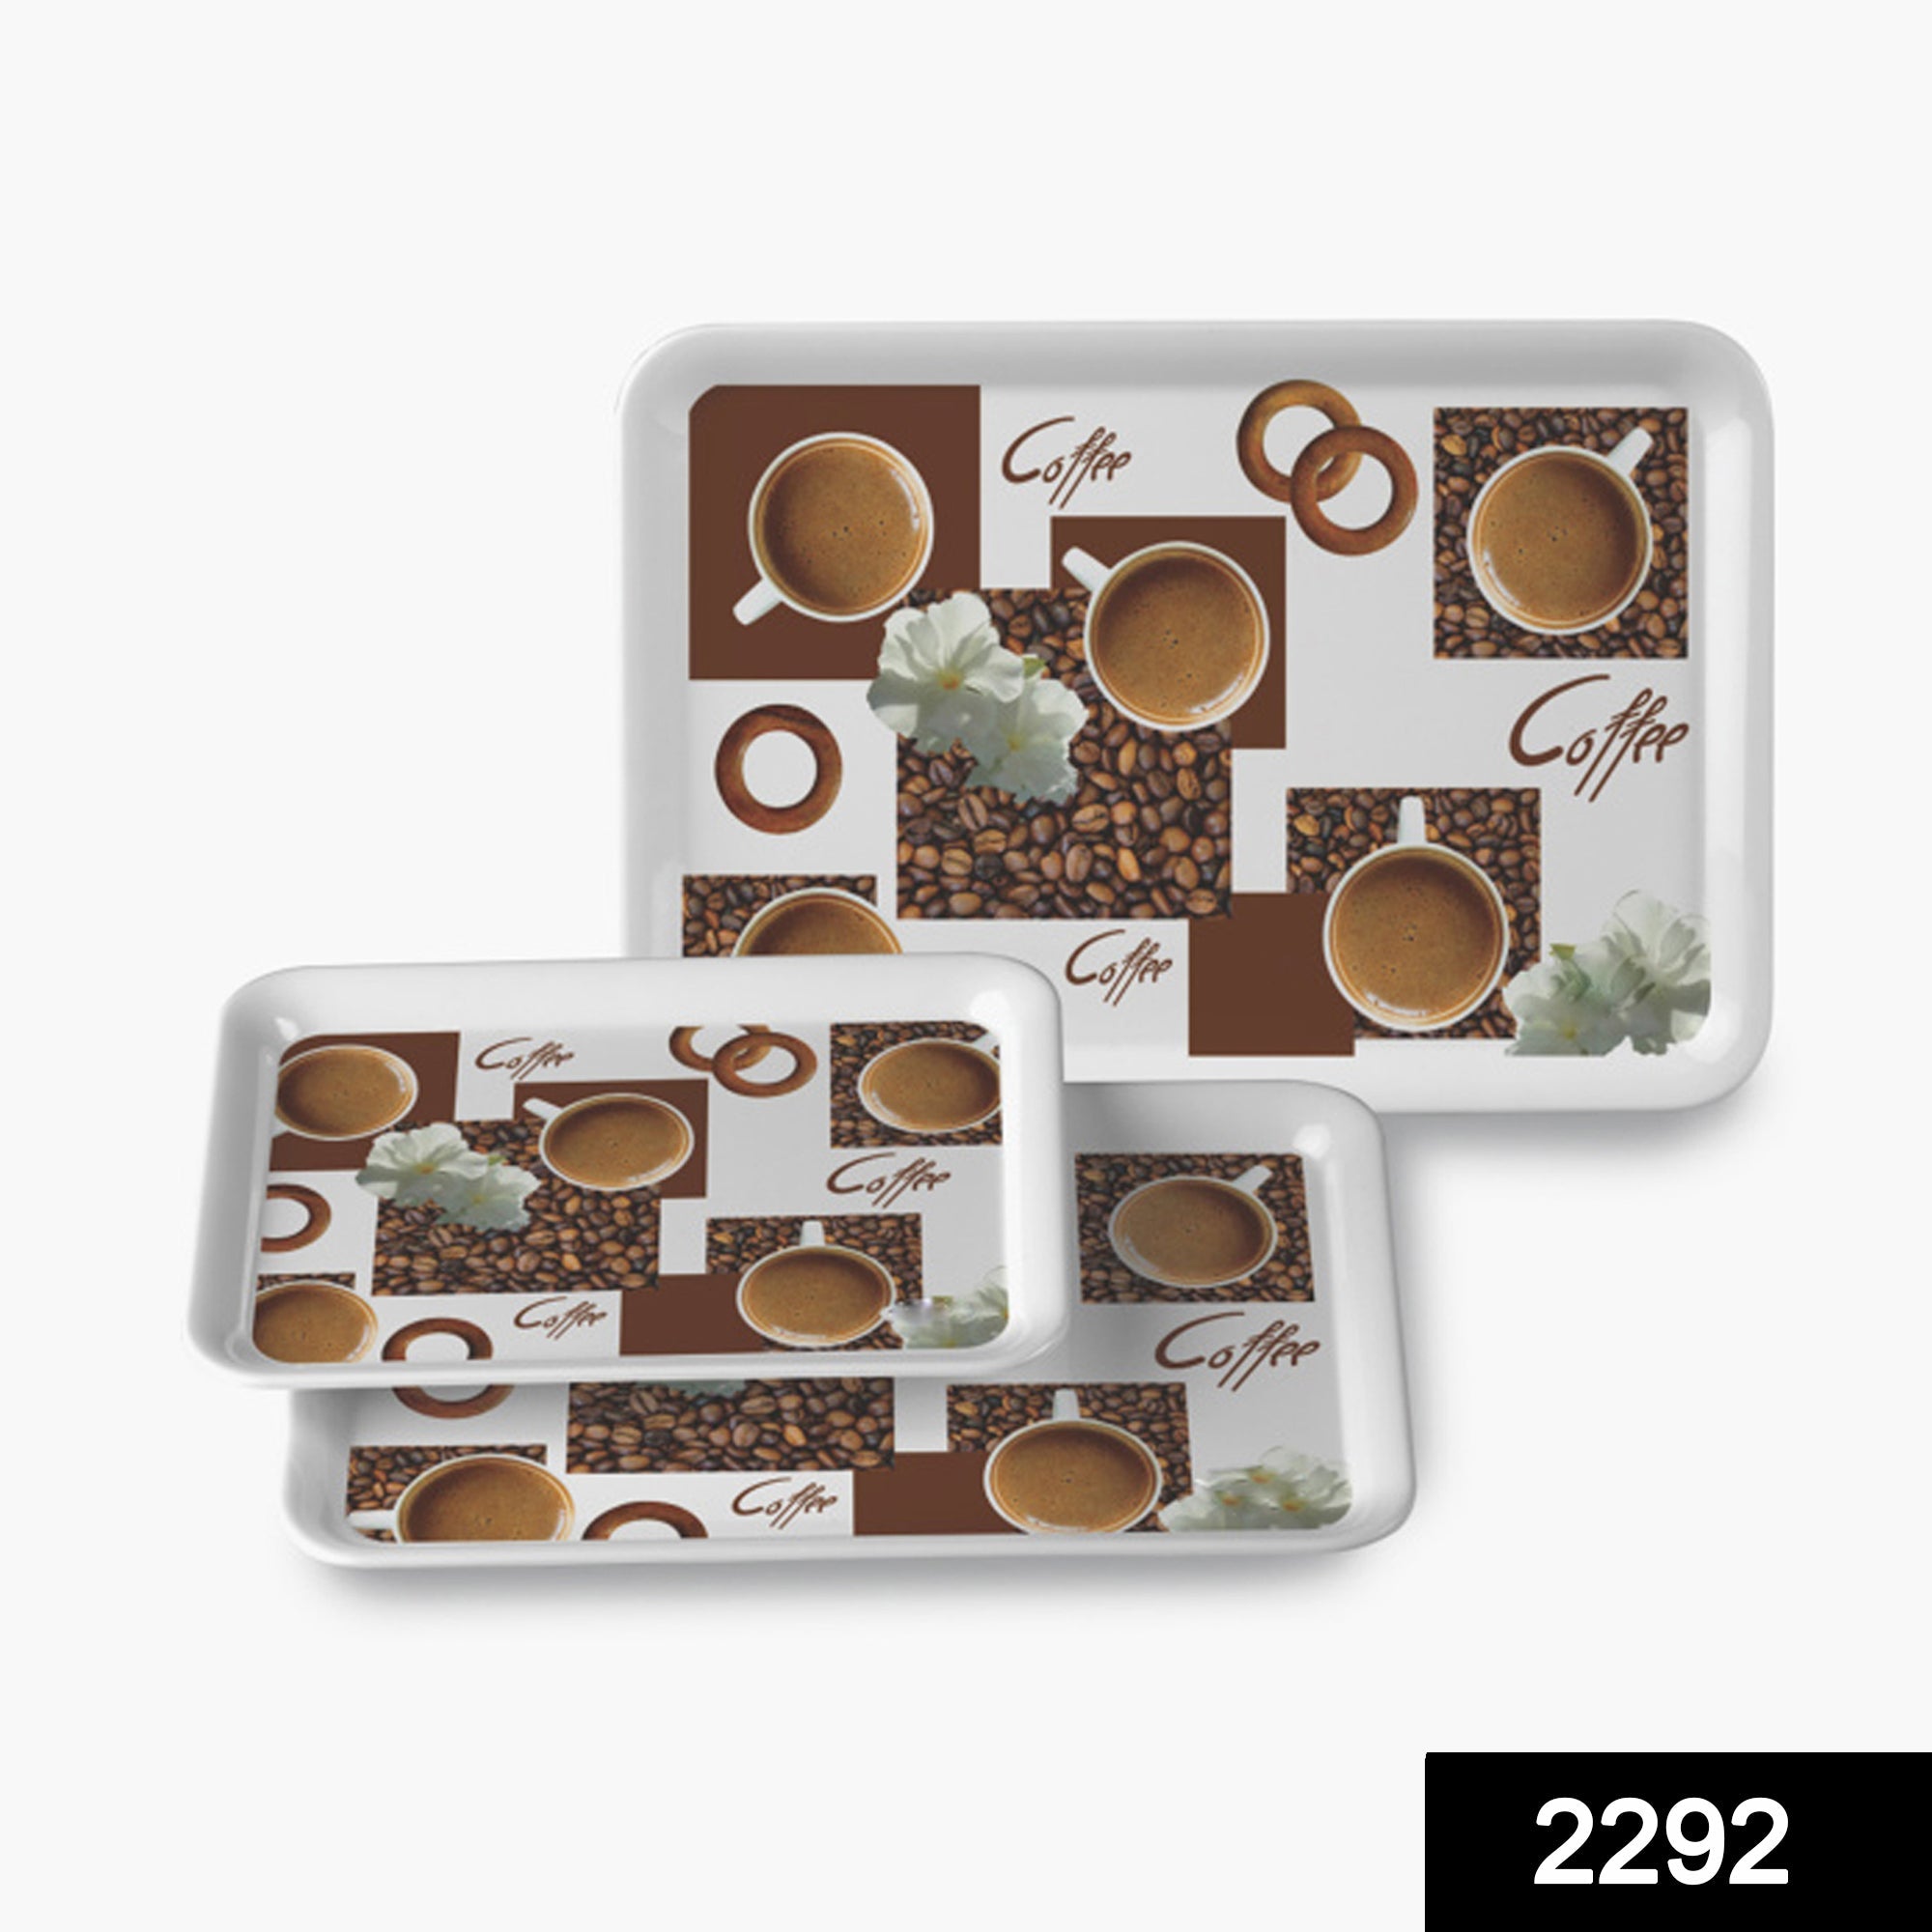 2292 Serving Tray Set  (Pack of 3 Pcs) (Small, Medium, Large) (Multicolour) 